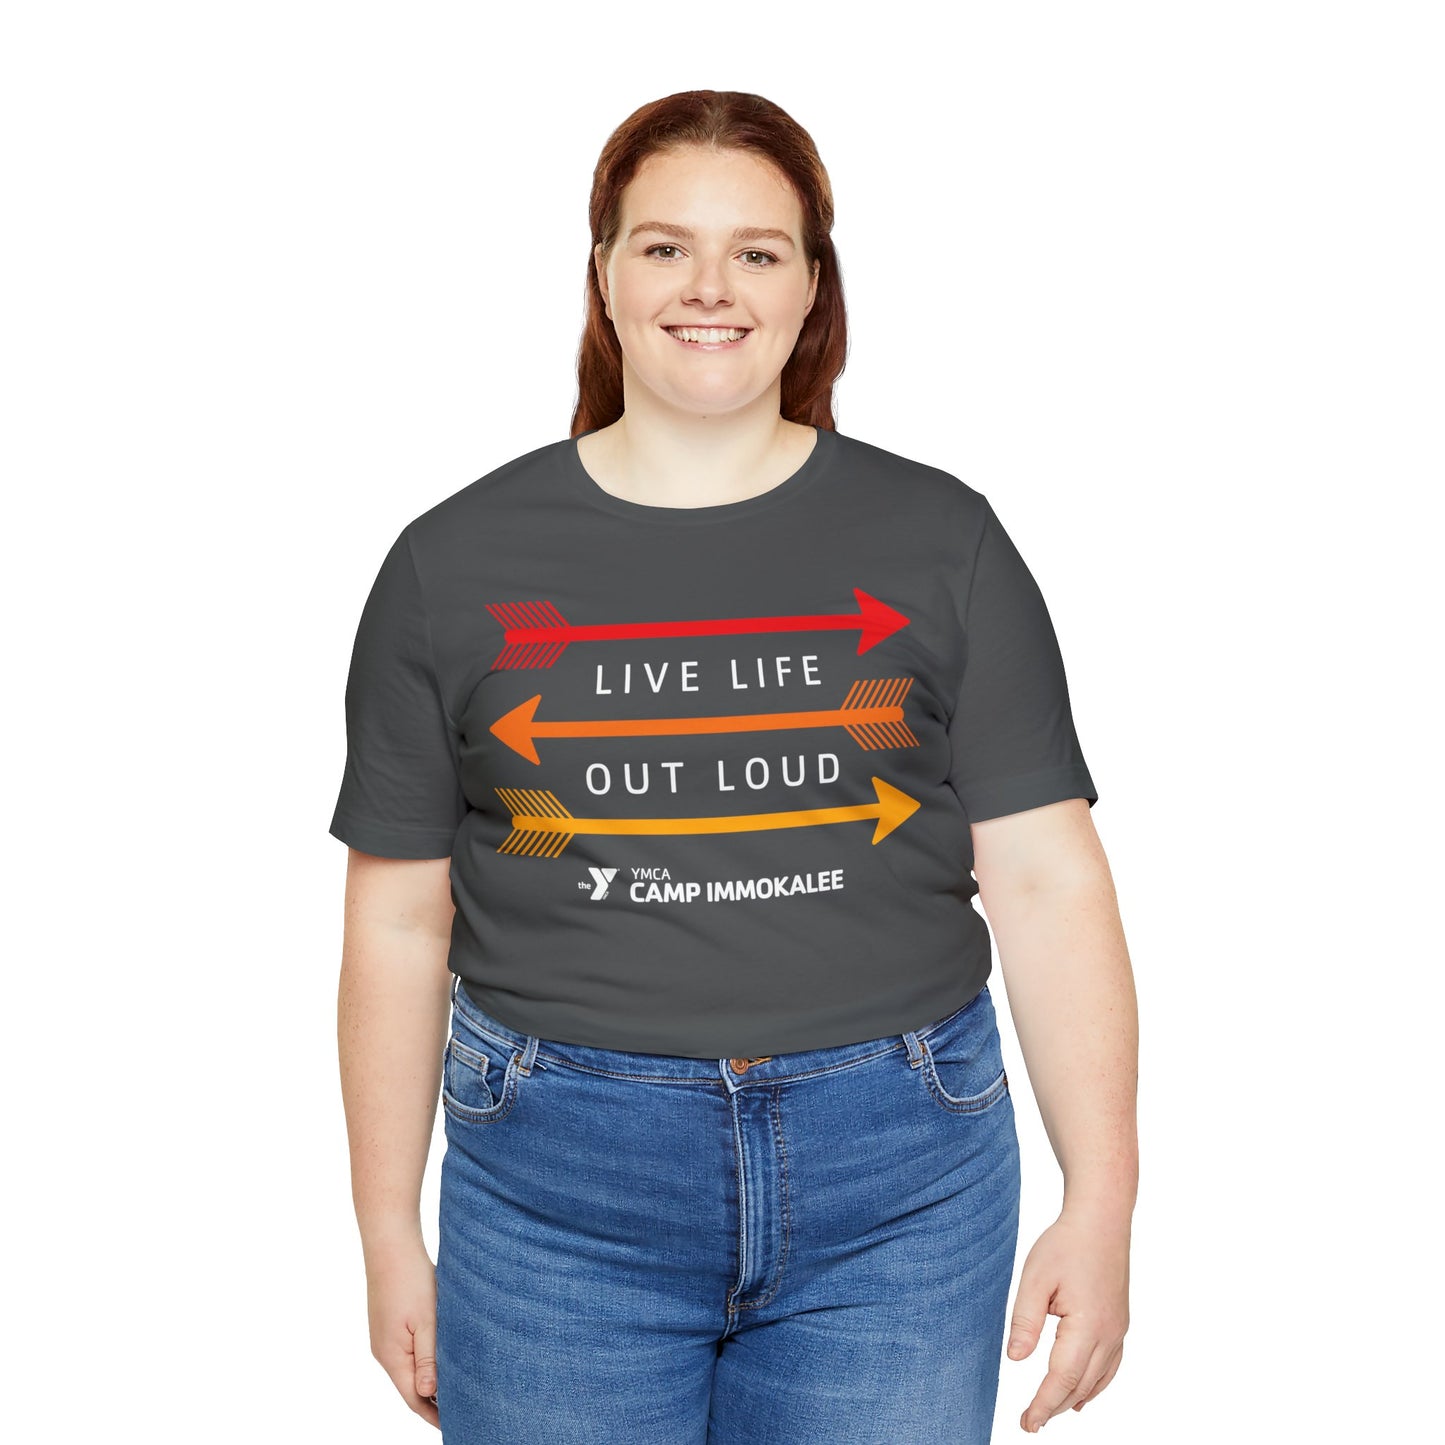 Camp Immokalee Live Life Out Loud Unisex Jersey Short Sleeve Tee